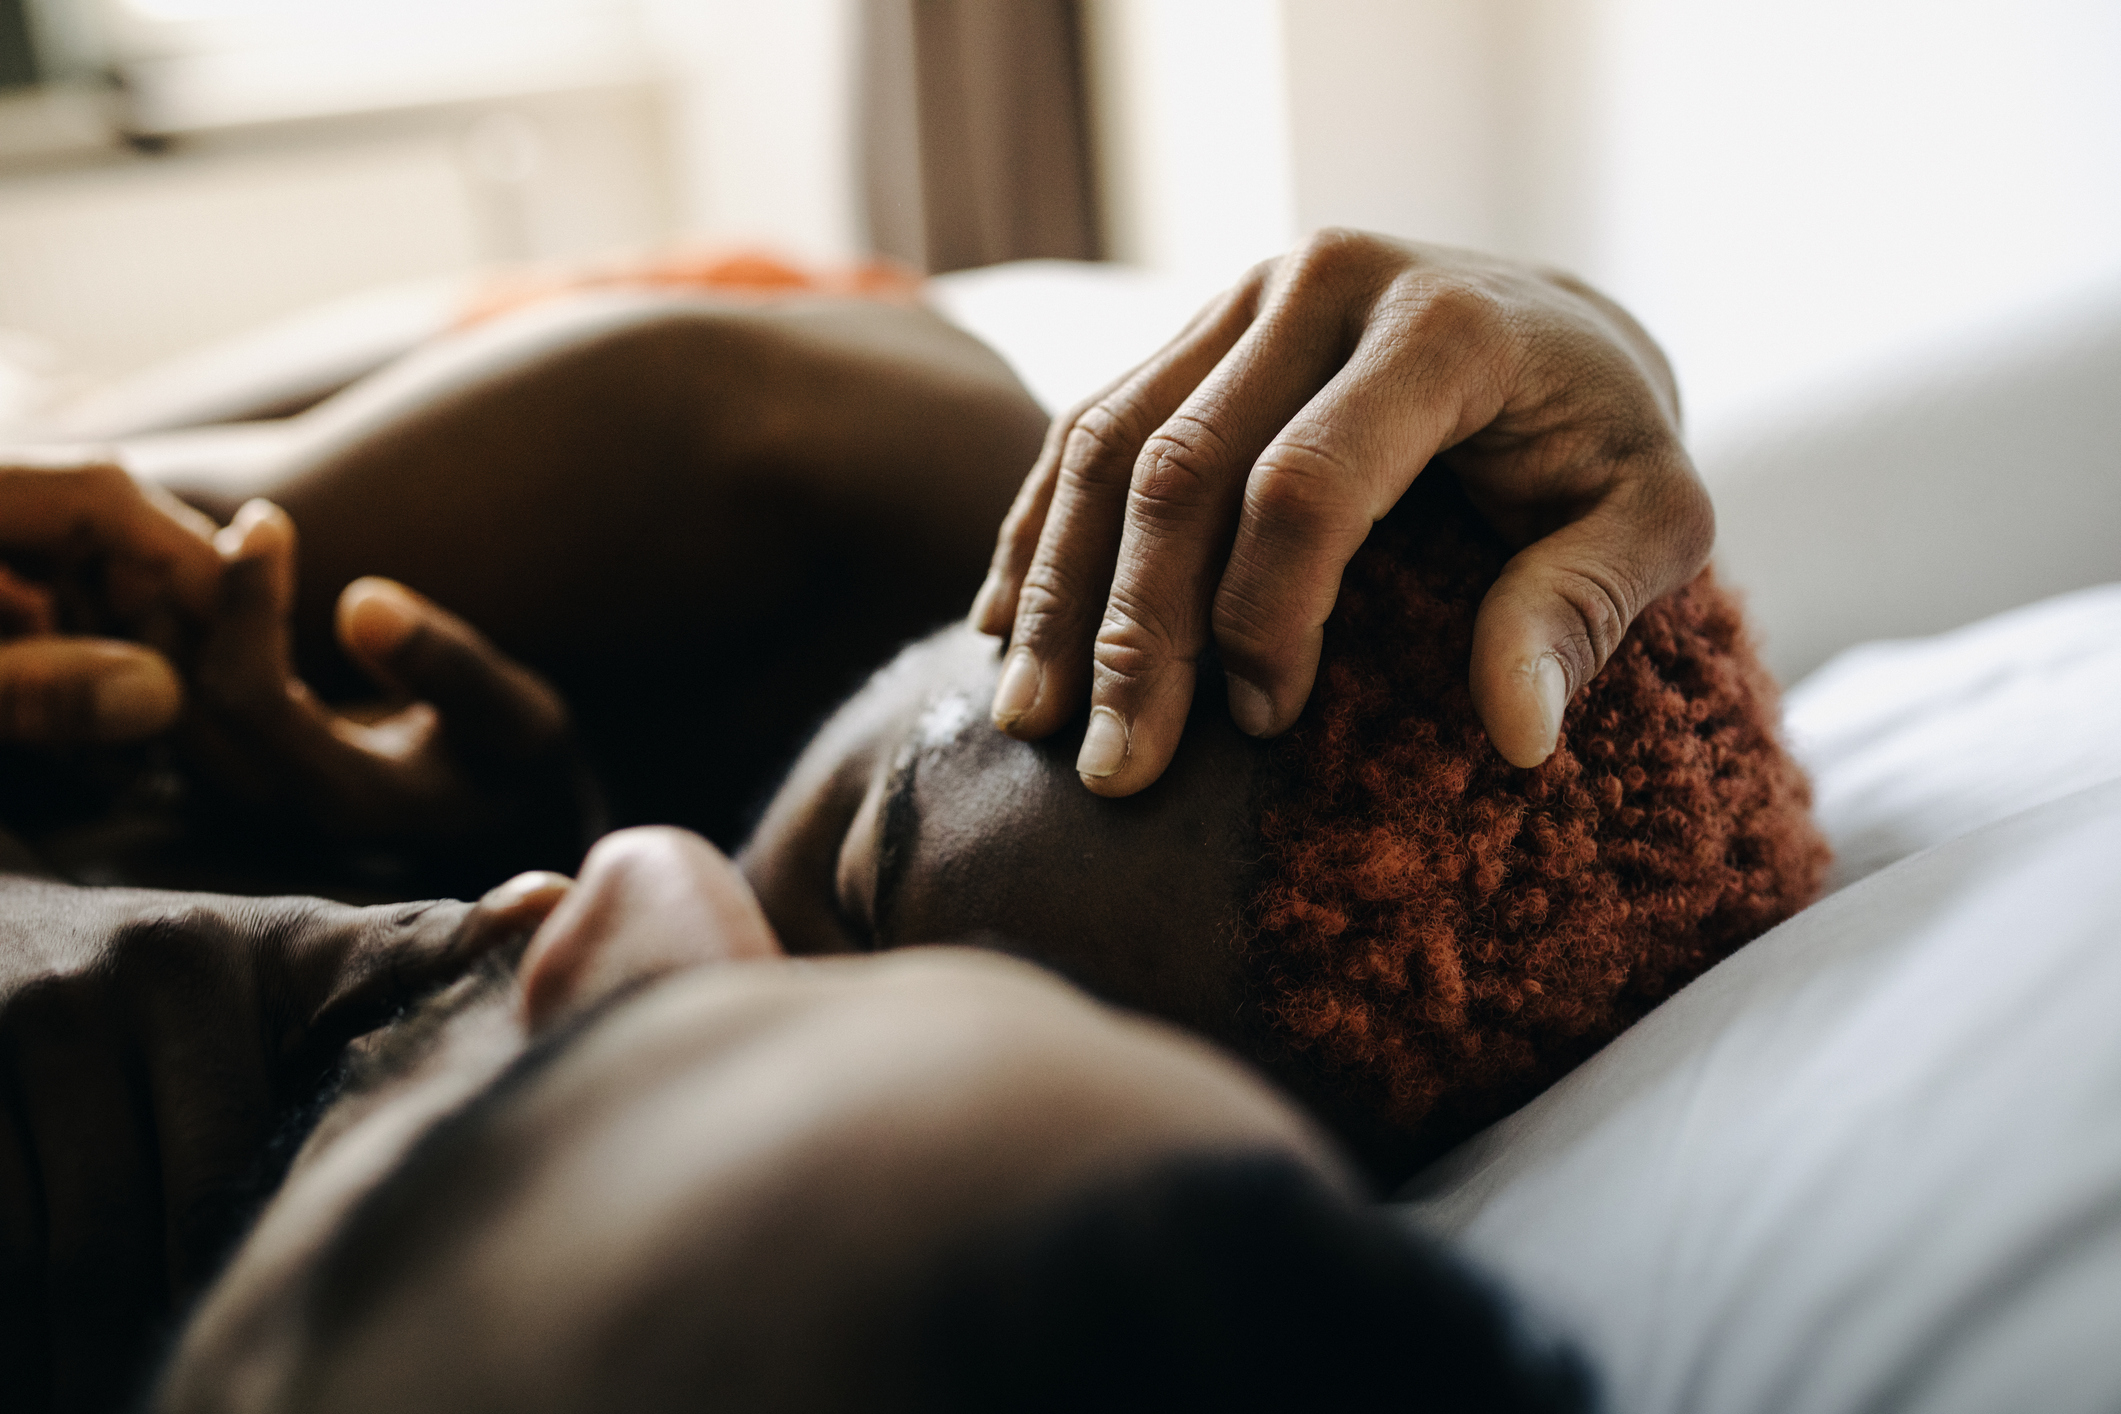 Two people embracing intimately on a bed, one caressing the other&#x27;s head